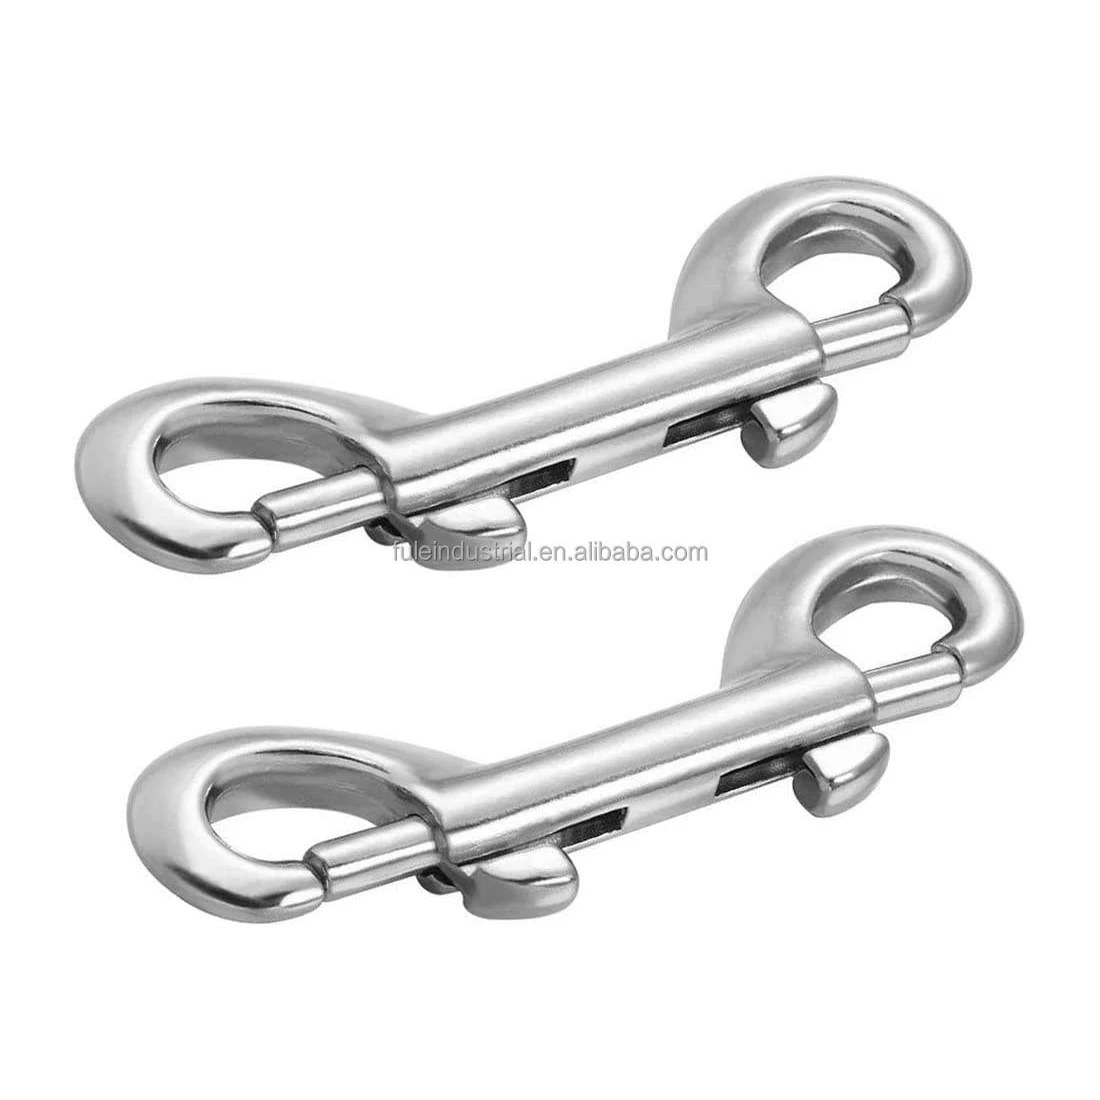 Stainless Steel Diving Double End Bolt Snap Hook Clips 90mm Boat Hardware  Double Ended Bolt ,90mm 3